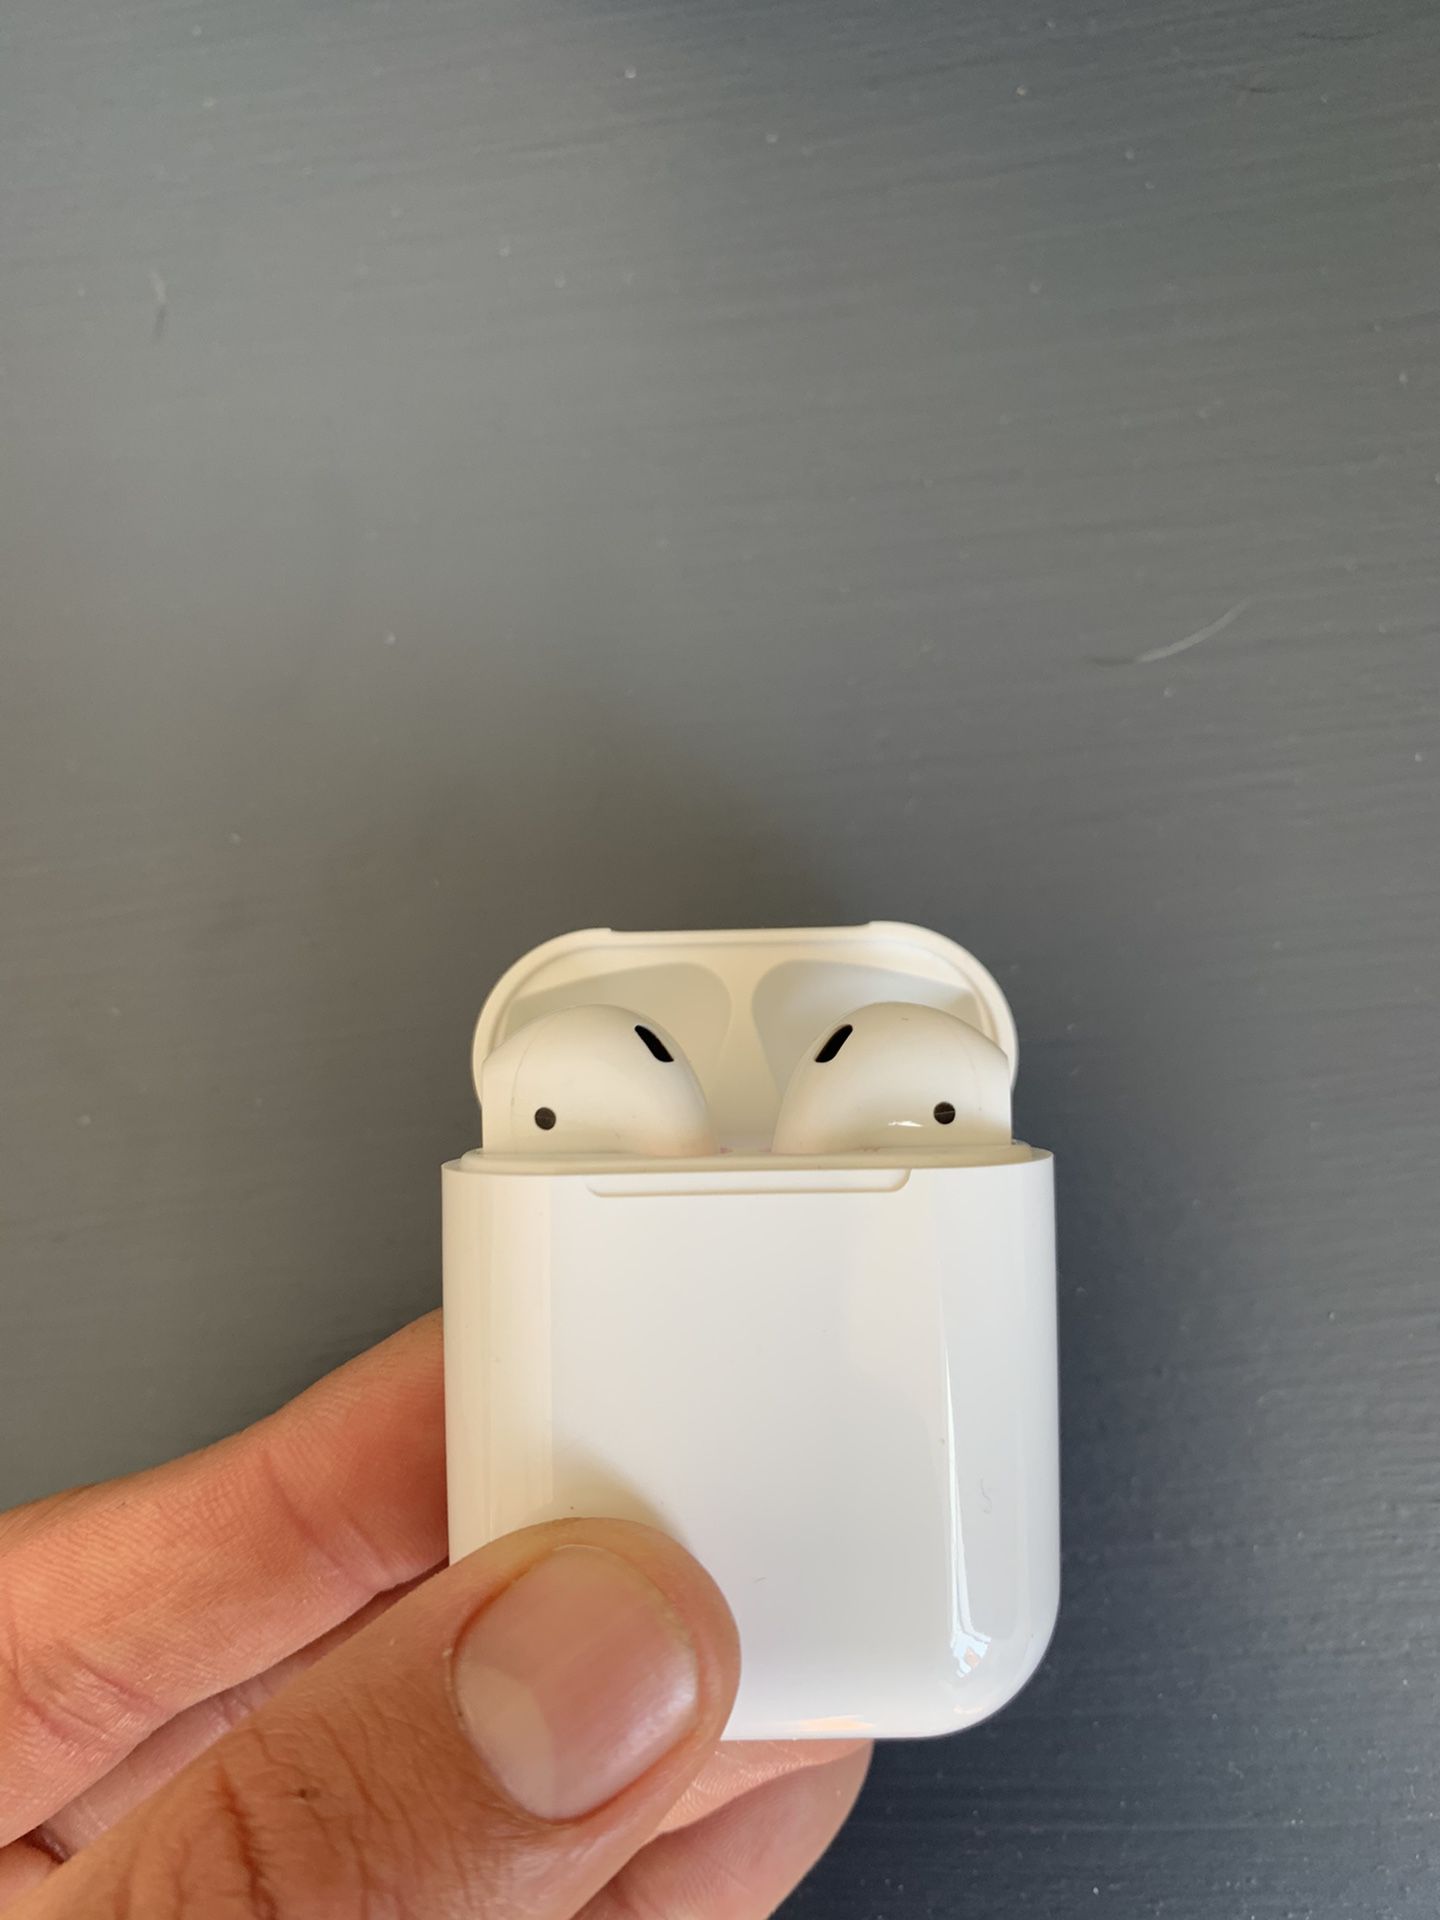 Brand new Airpods with charging case